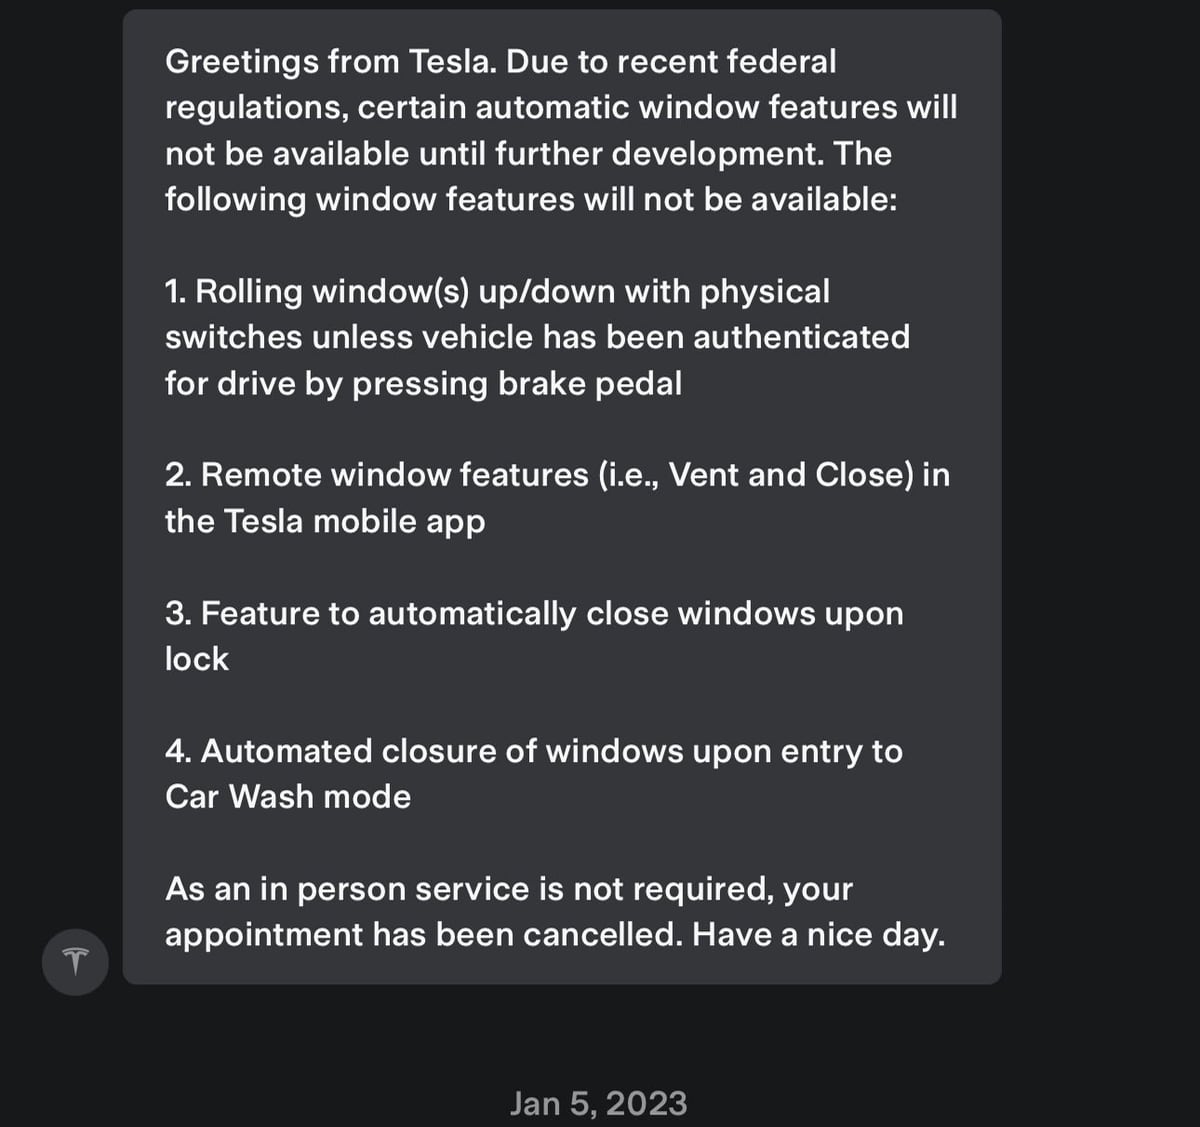 Tesla service responds to @Tommyf902 about the unavailability of his window auto-close feature